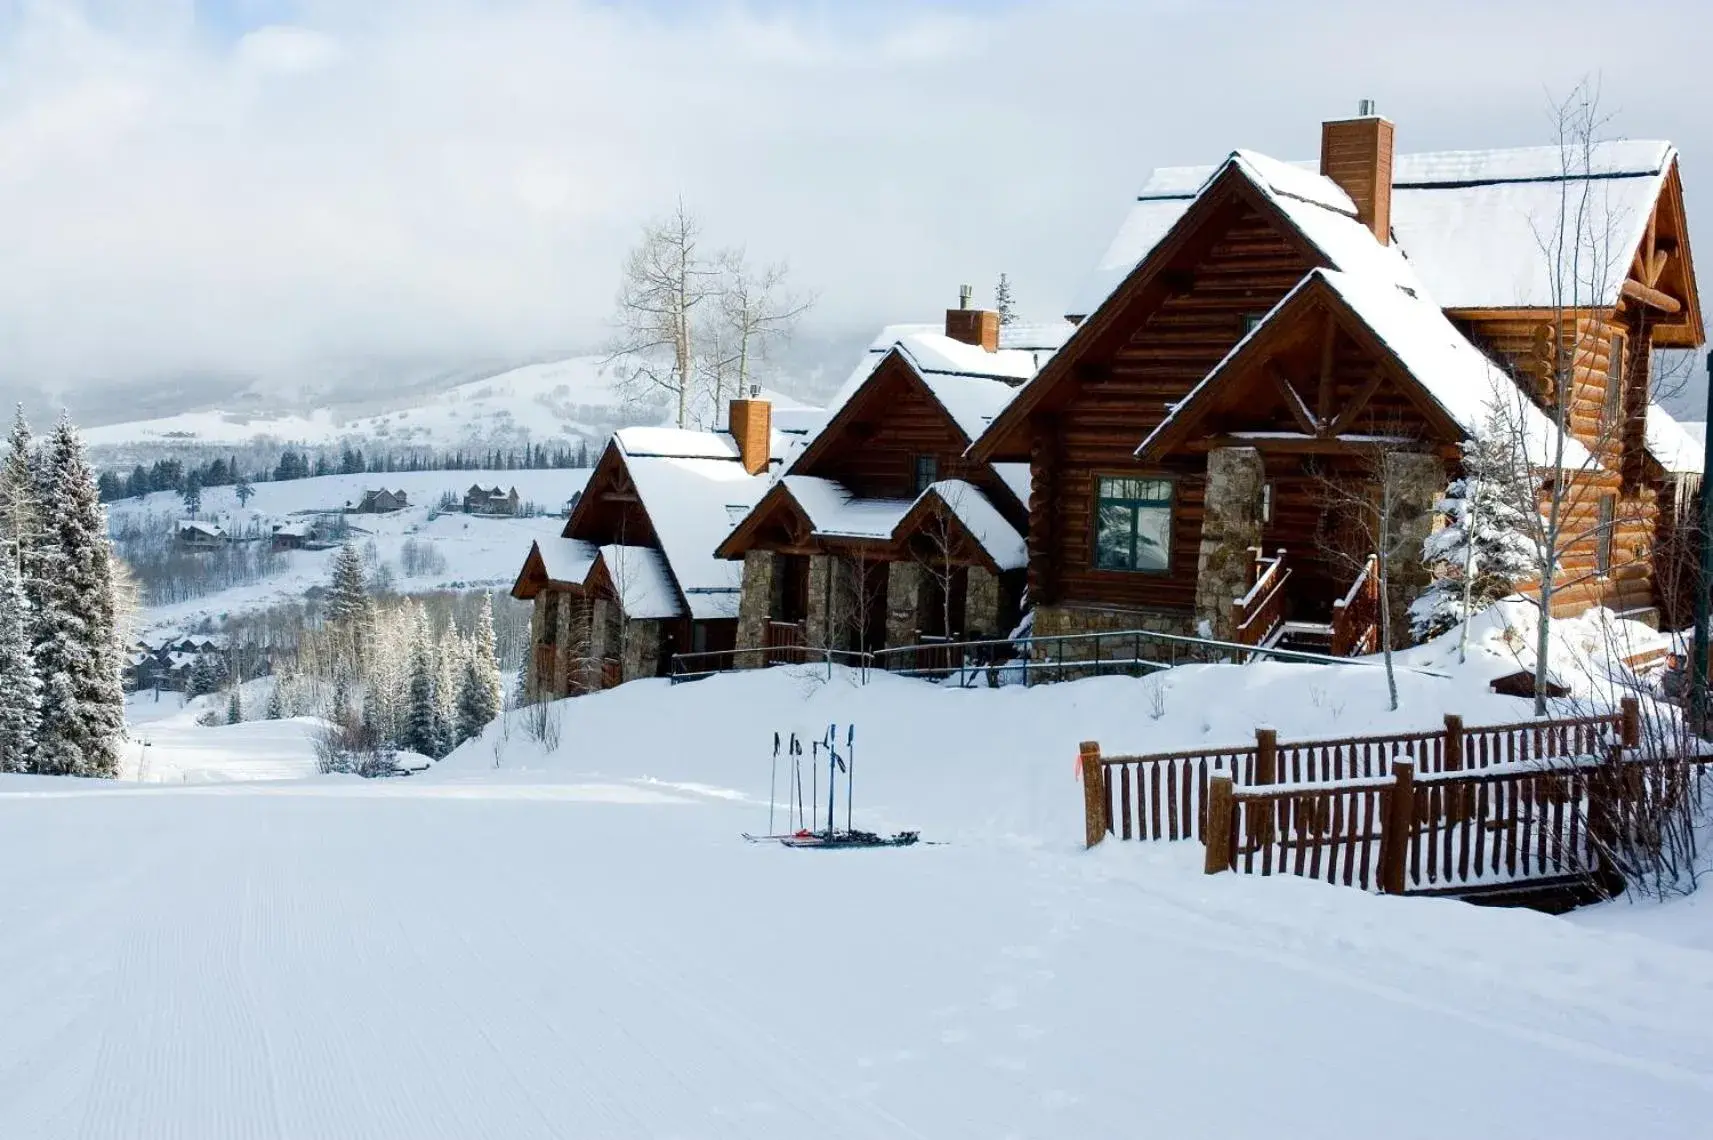 Property building, Winter in Mountain Lodge at Telluride